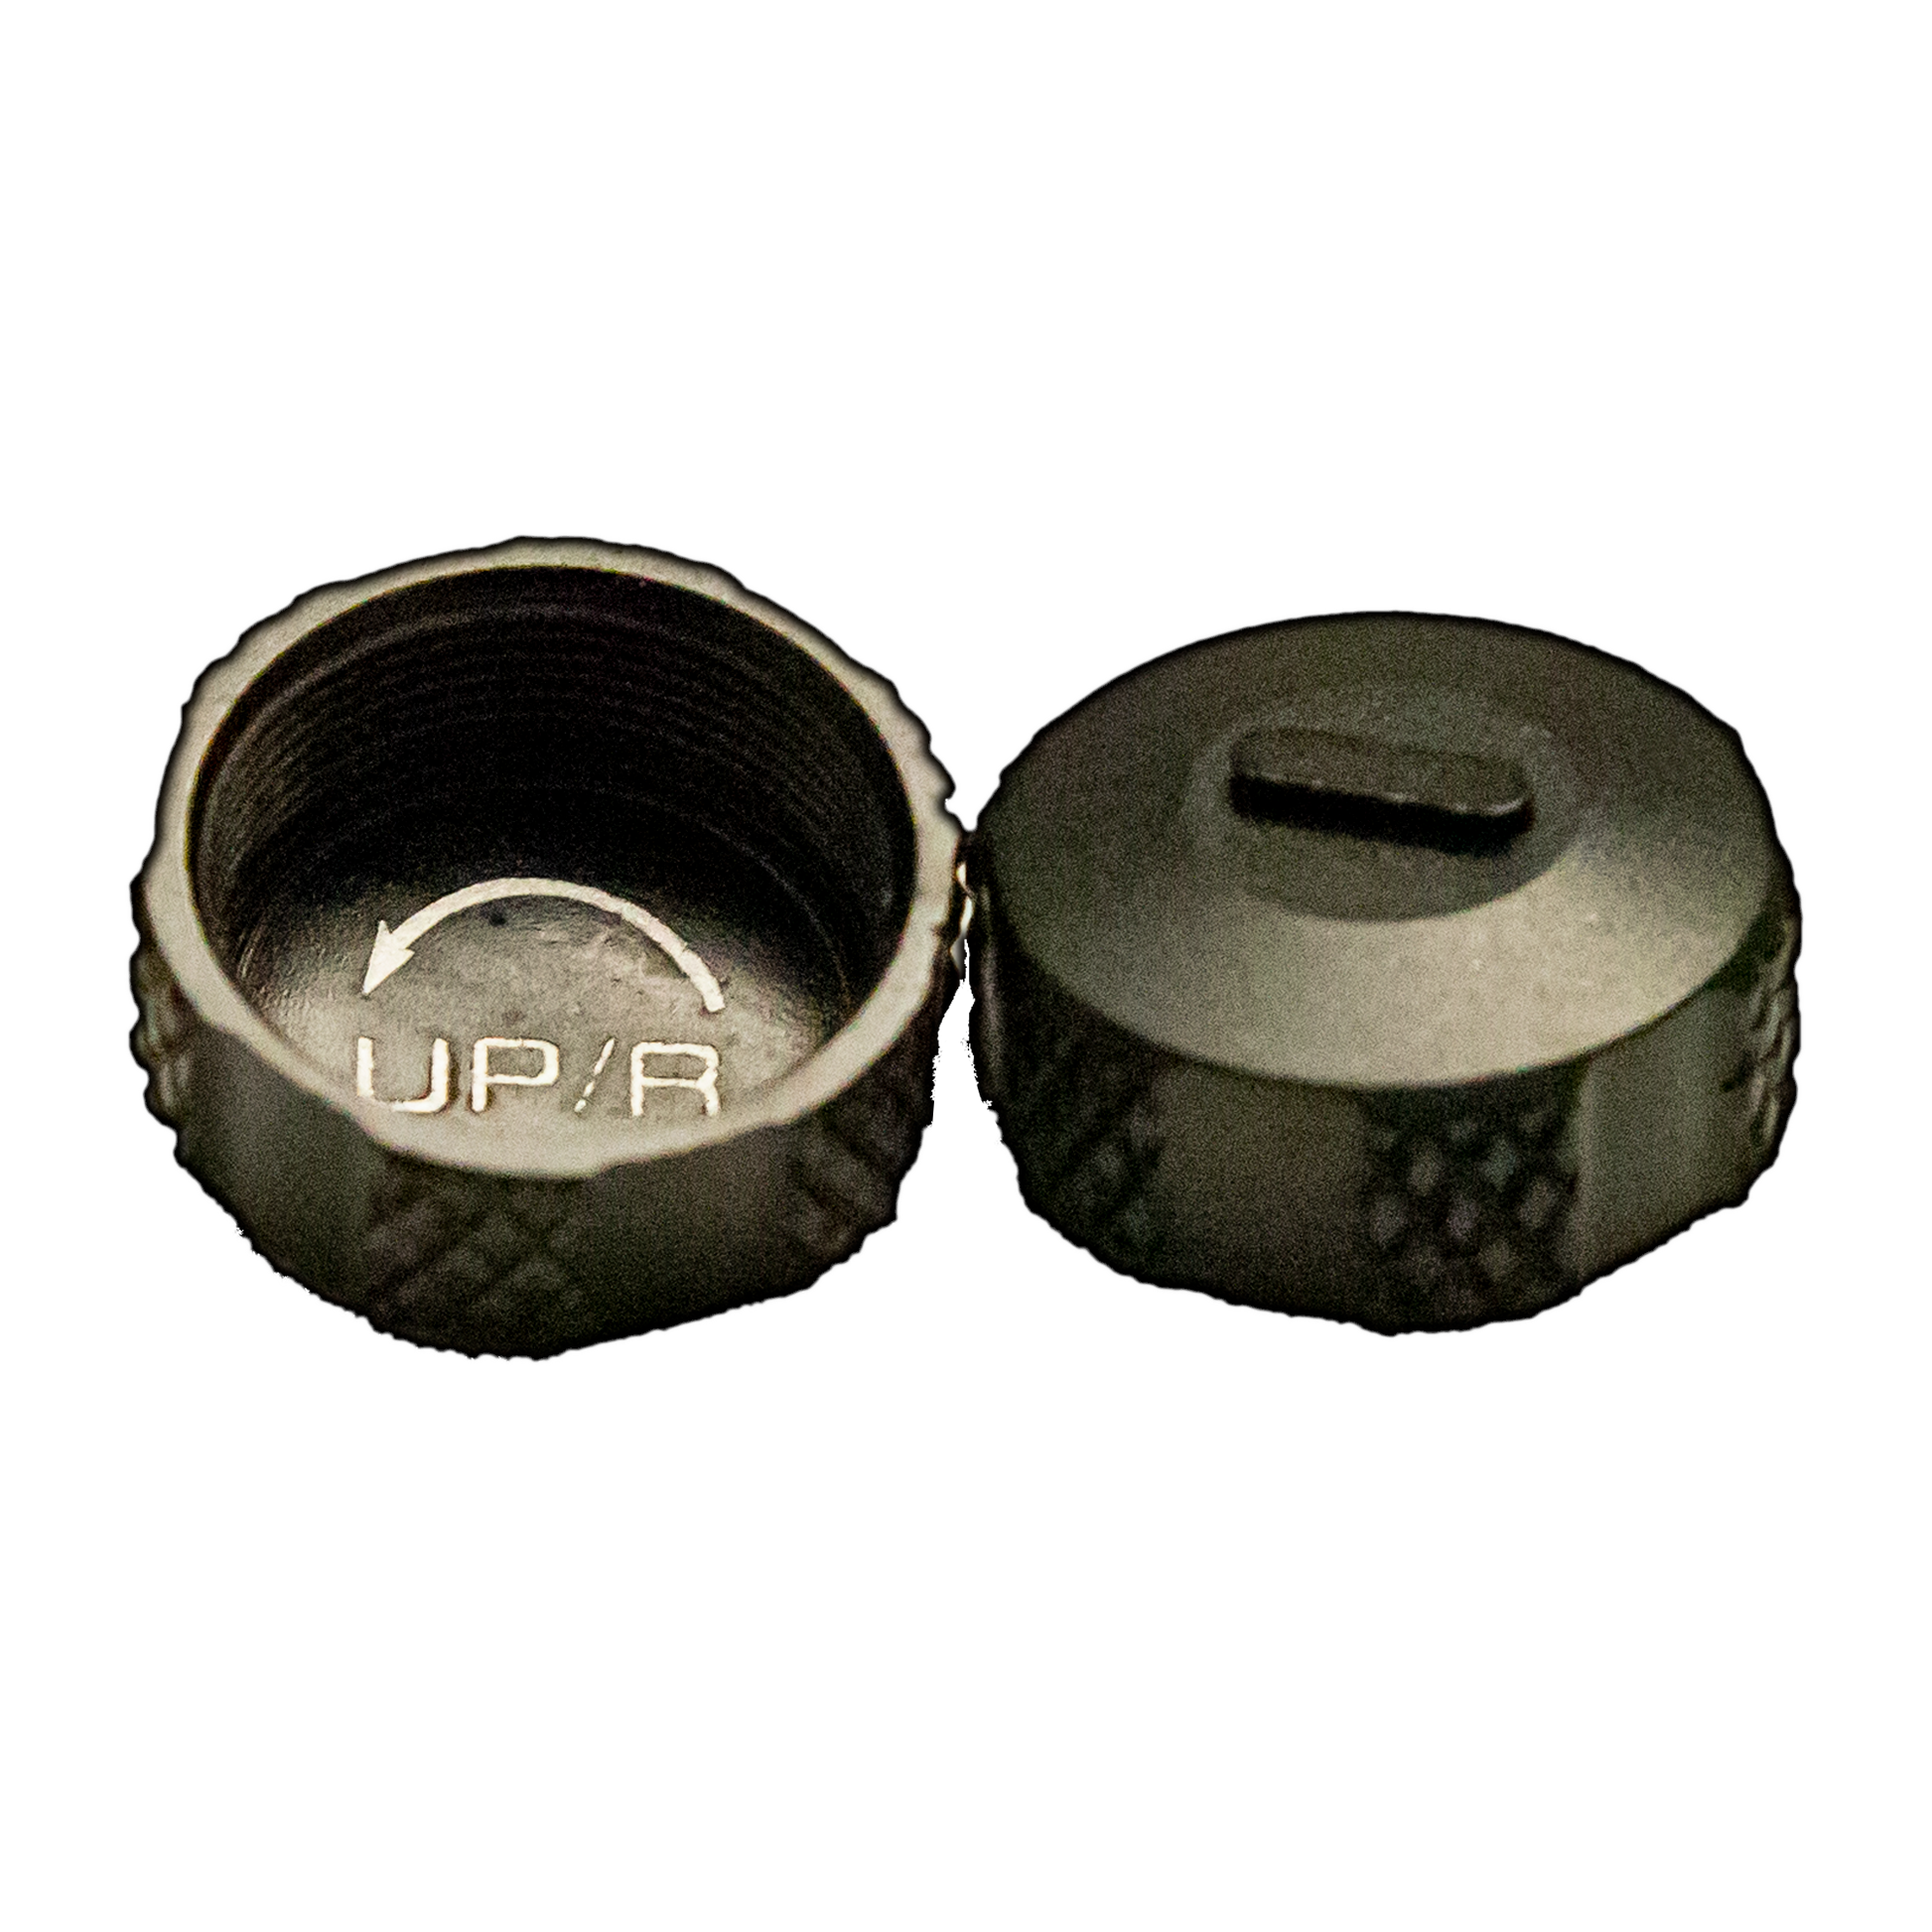 a pair of metal knobs on a black background